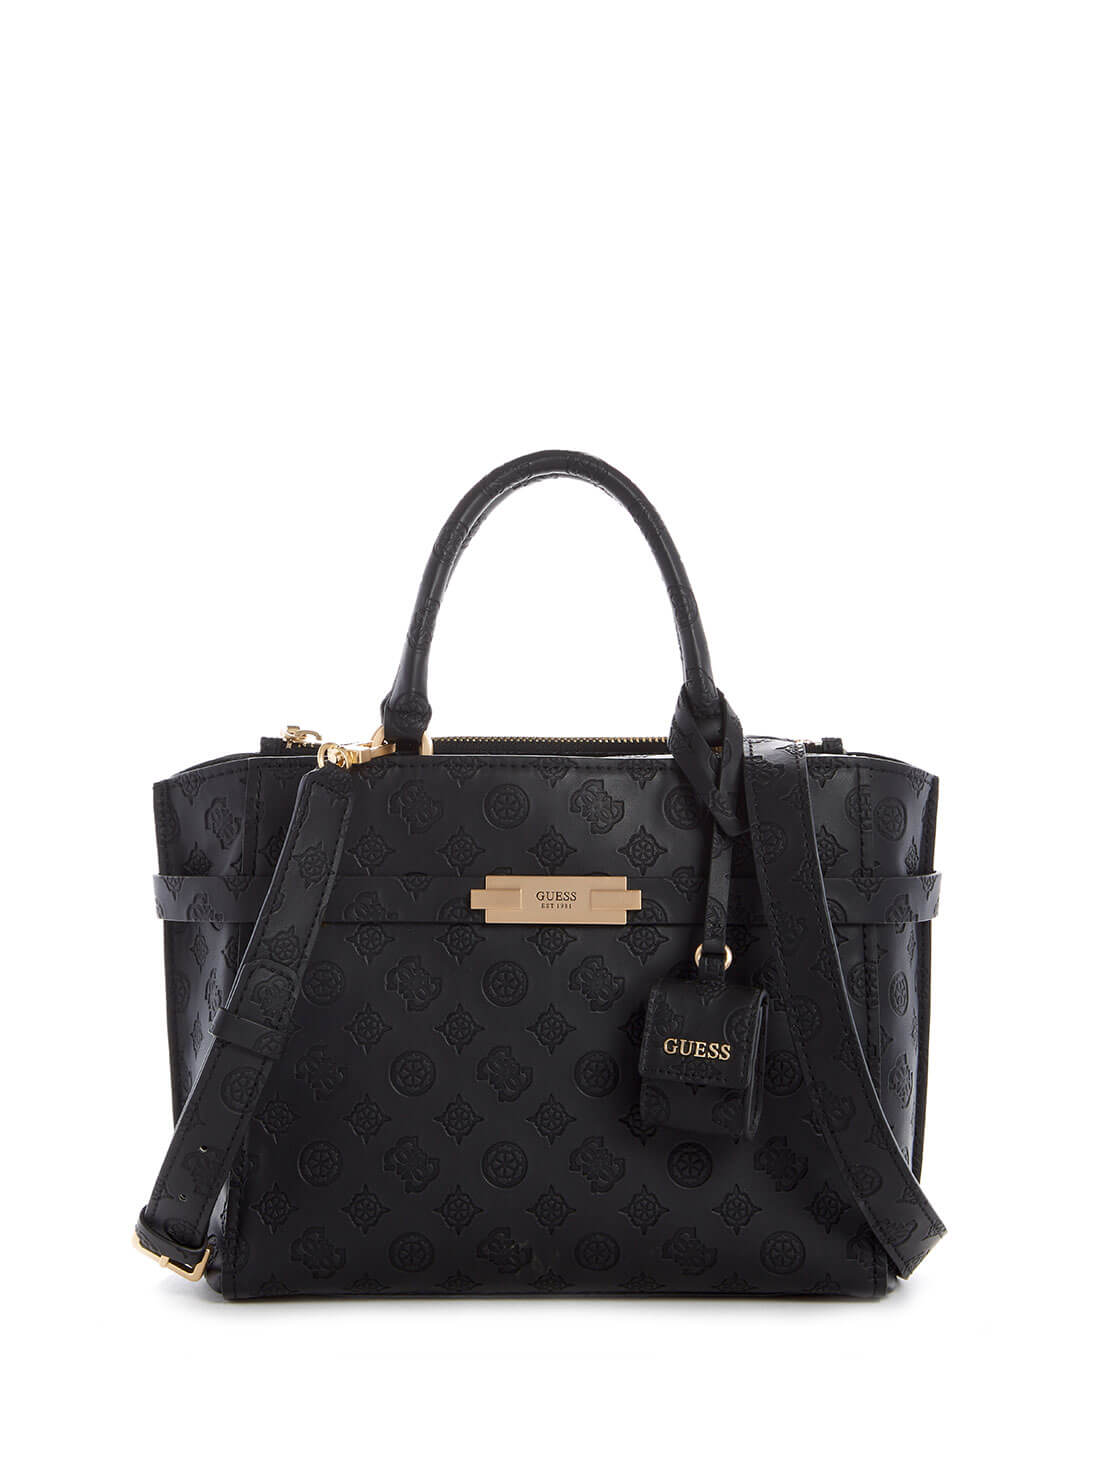 GUESS Black Bea Society Satchel Bag front view